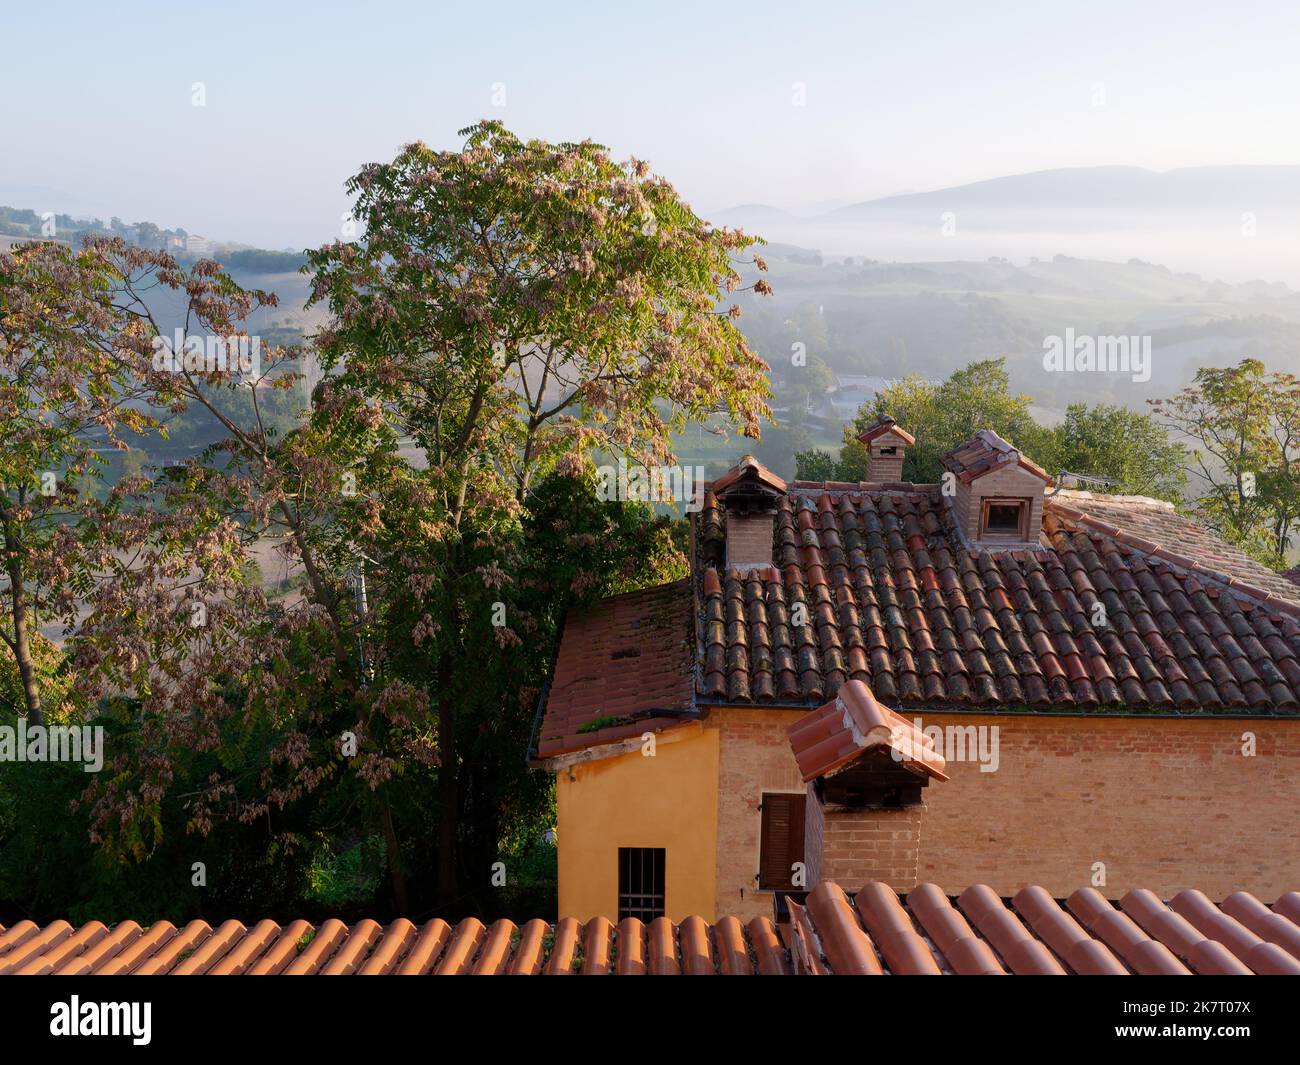 Misty morning view from a house in Coccore in the Le Marche region of Italy over the surrounding rolling hills and countryside. Stock Photo